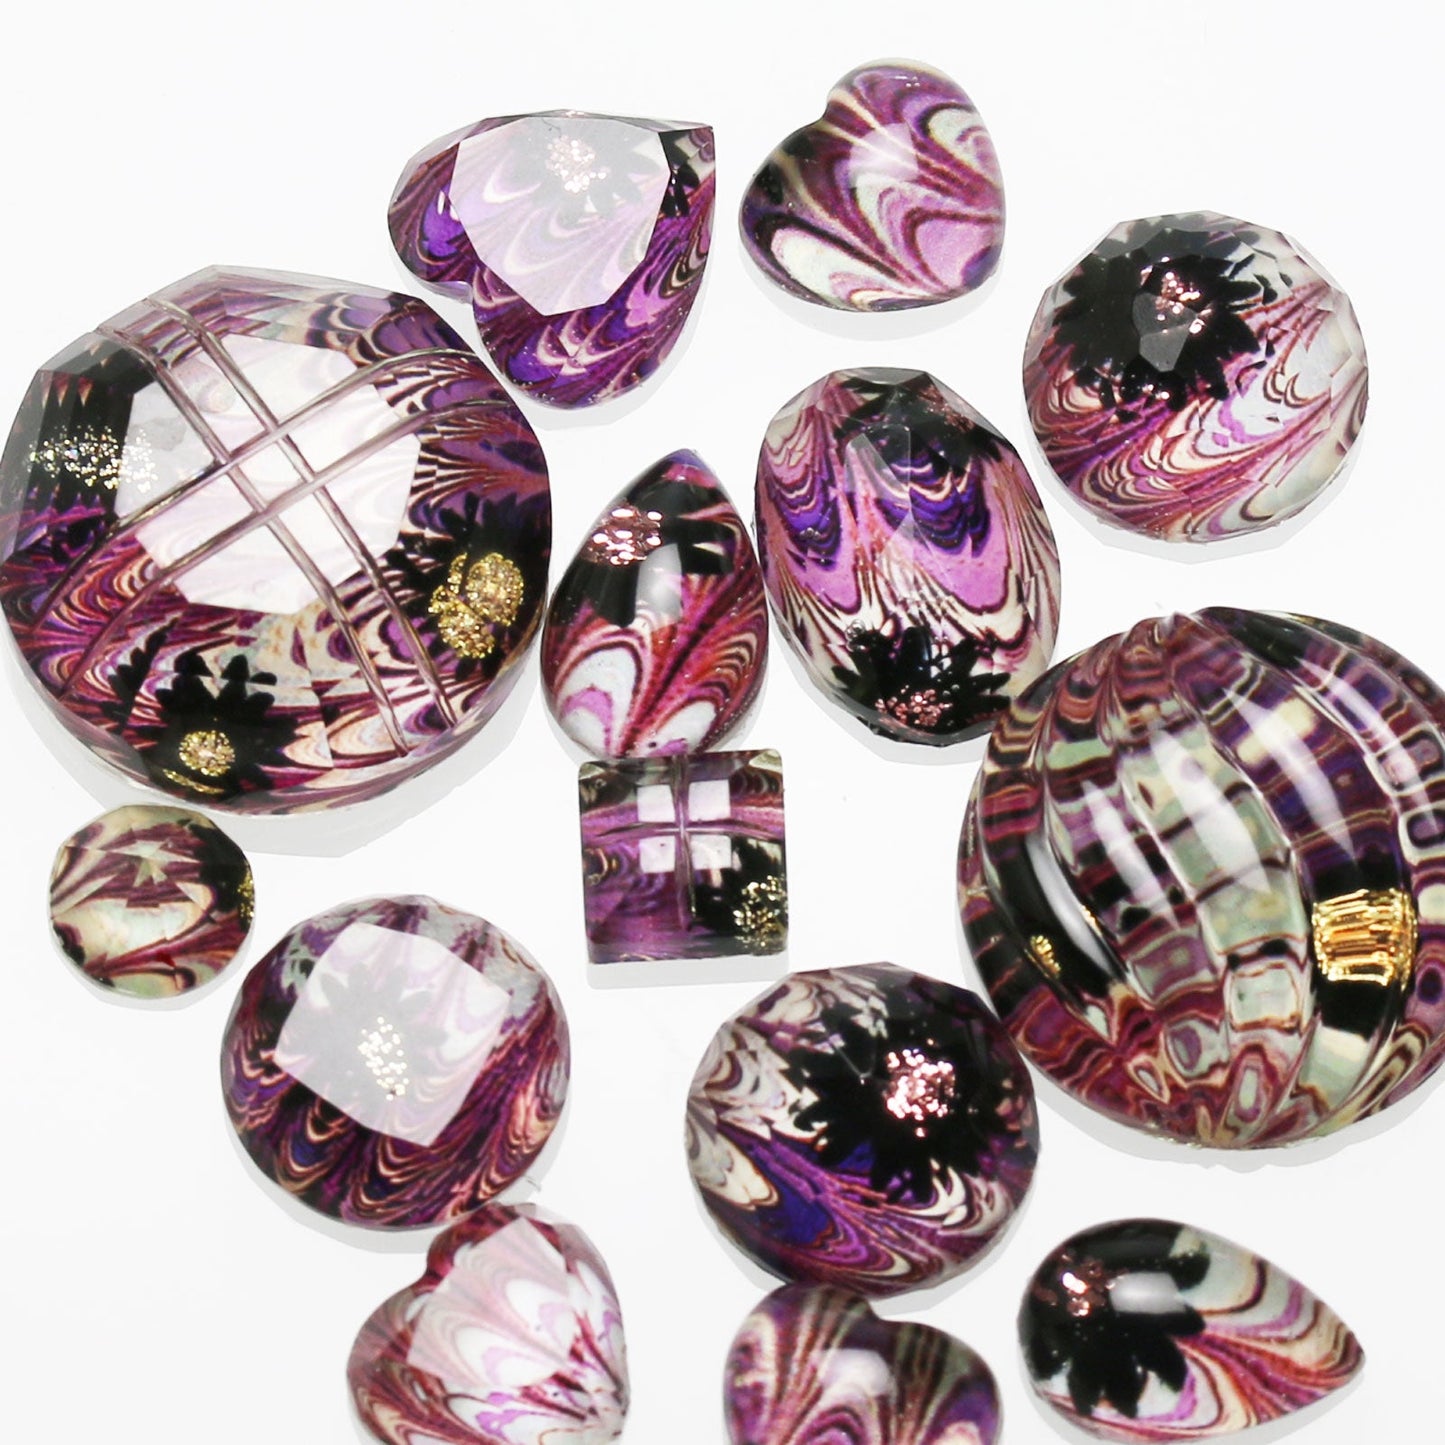 Button Cover Marble Purple Cuff Links TAMARUSAN